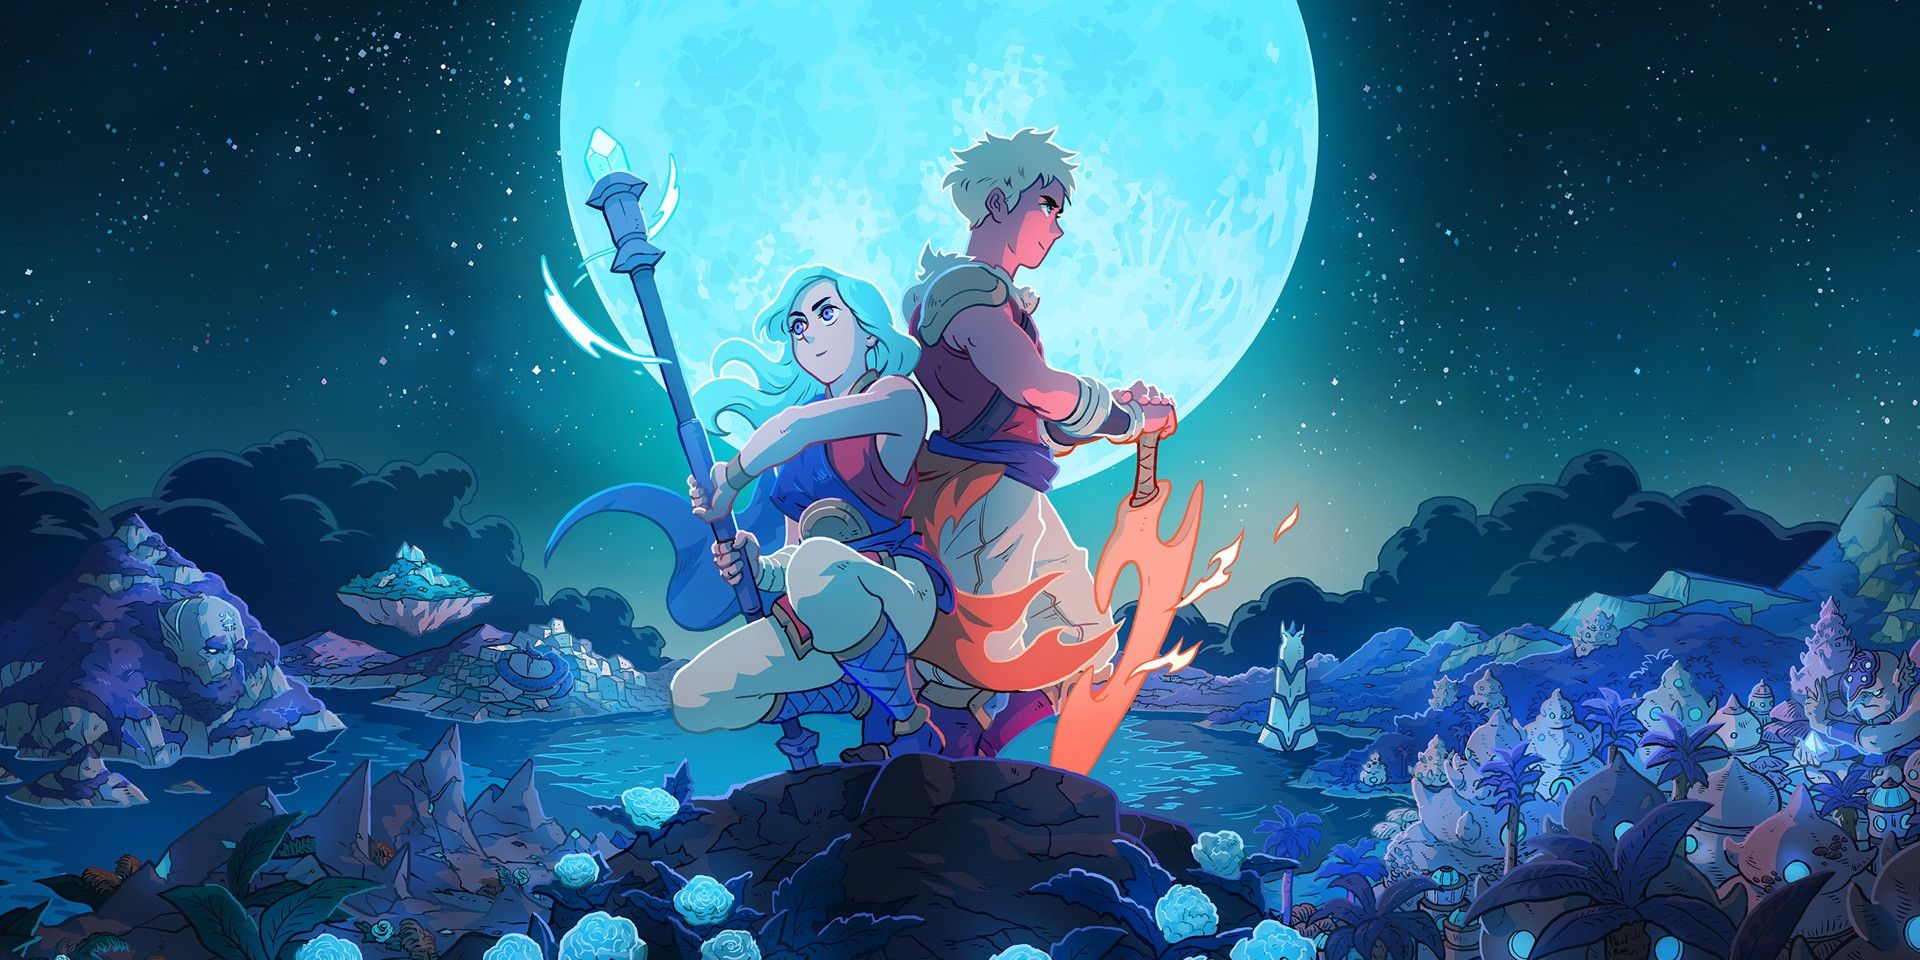 Key art for Sea of Stars, showing two characters perched on a rock and backed by a large moon in the night sky.